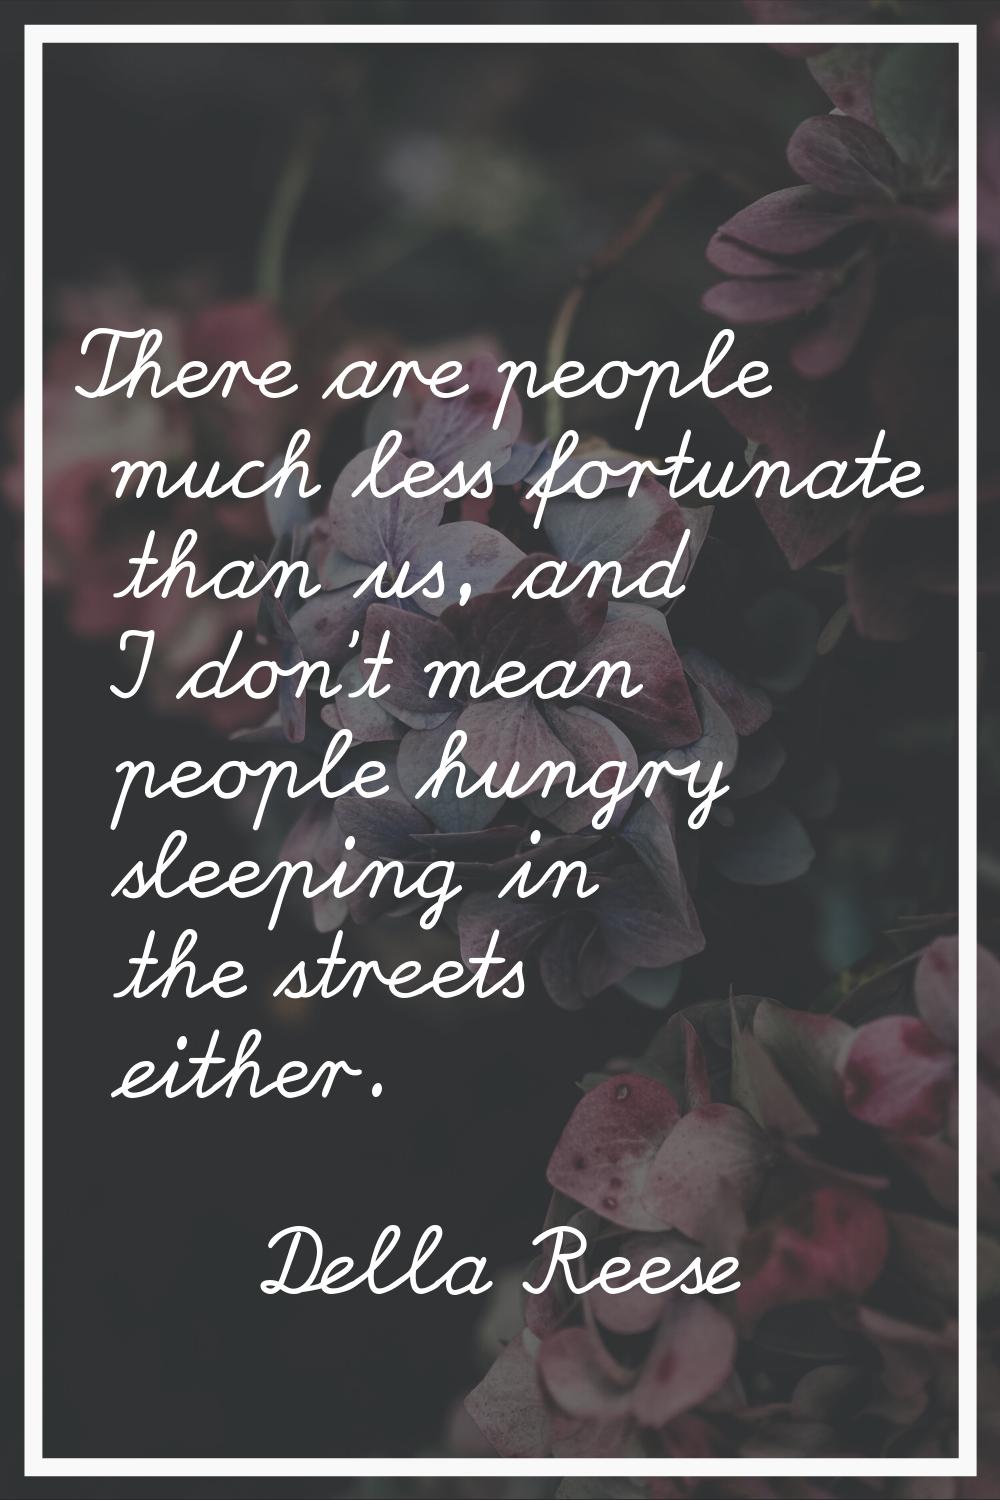 There are people much less fortunate than us, and I don't mean people hungry sleeping in the street